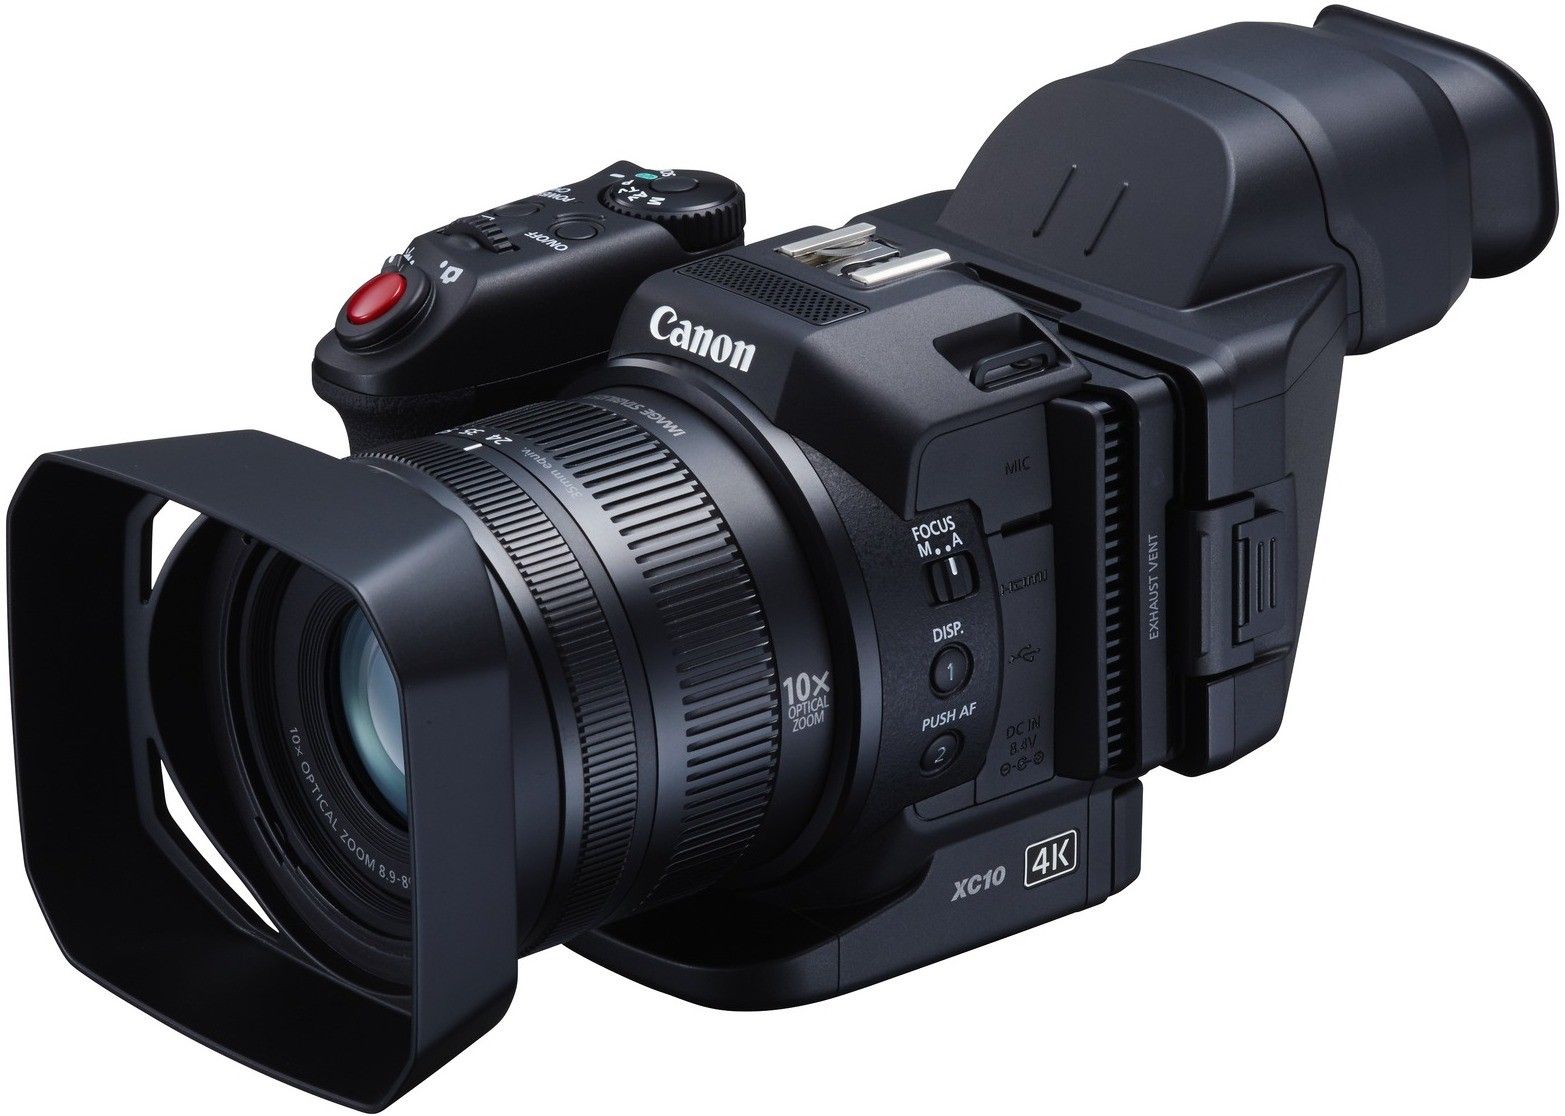 Price of Canon's XC10 4K Camera Has Dropped to 2,000